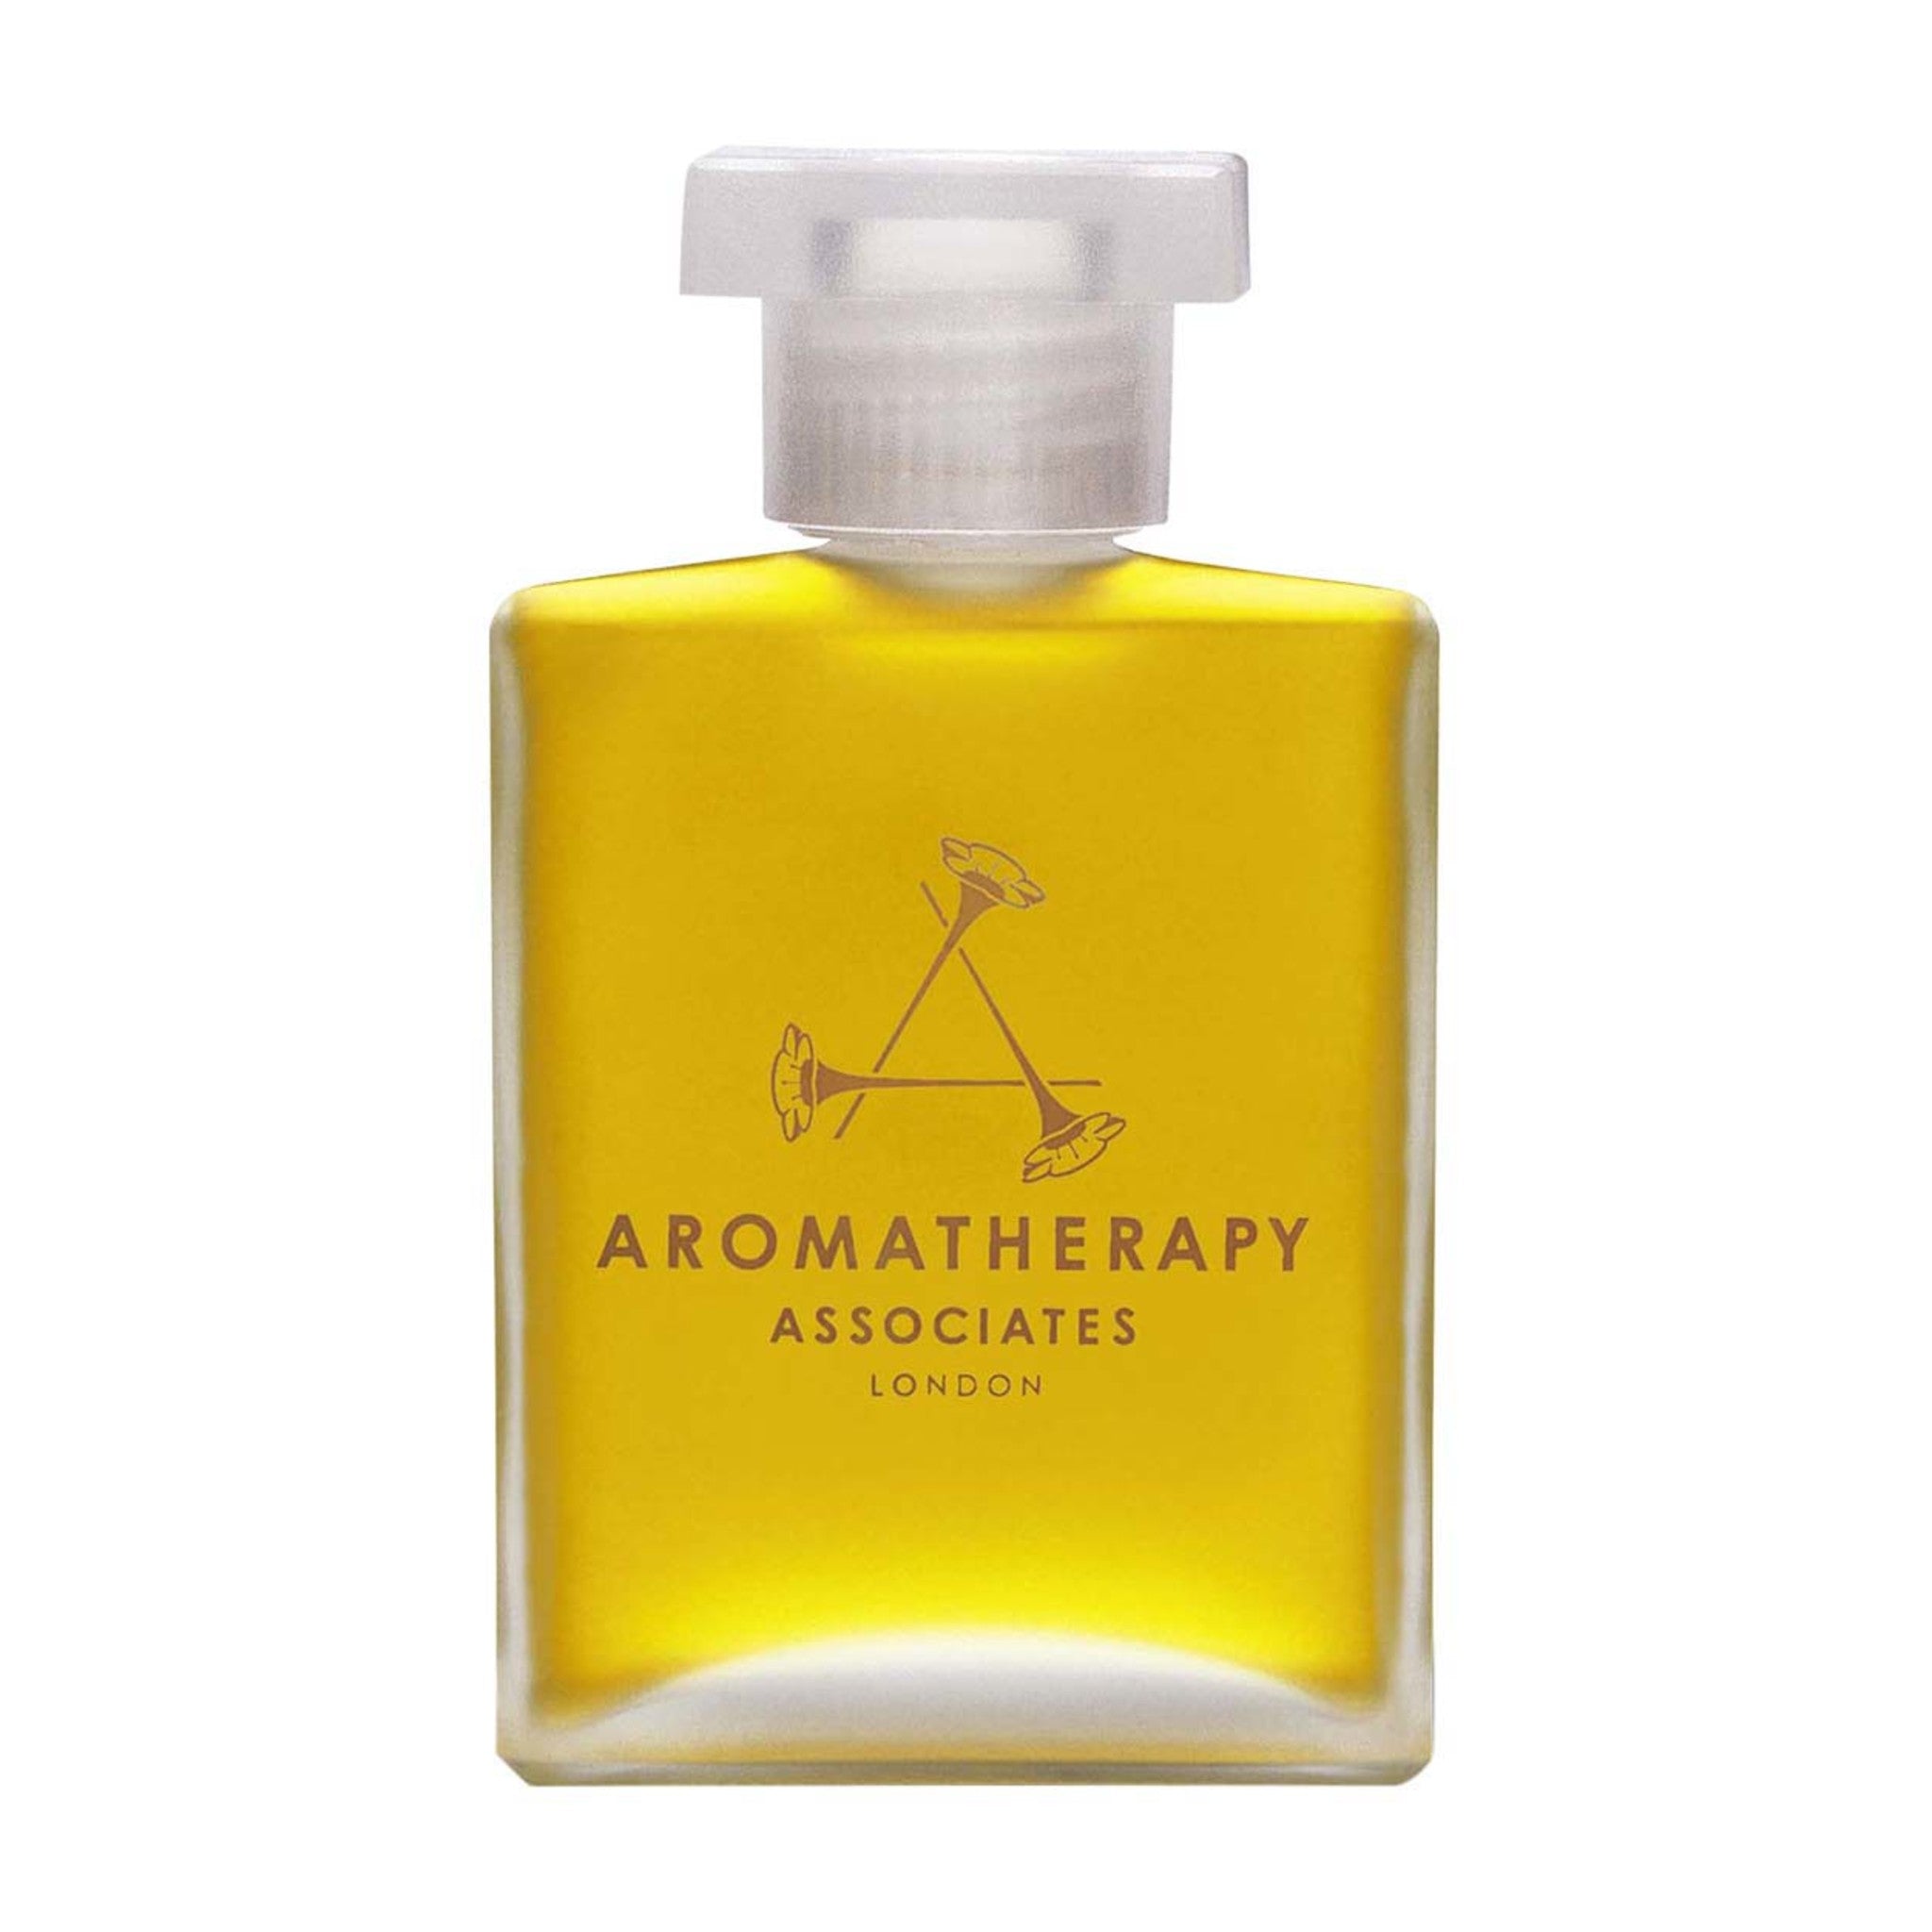 Aromatherapy Associates Revive Morning Bath and Shower Oil main image.